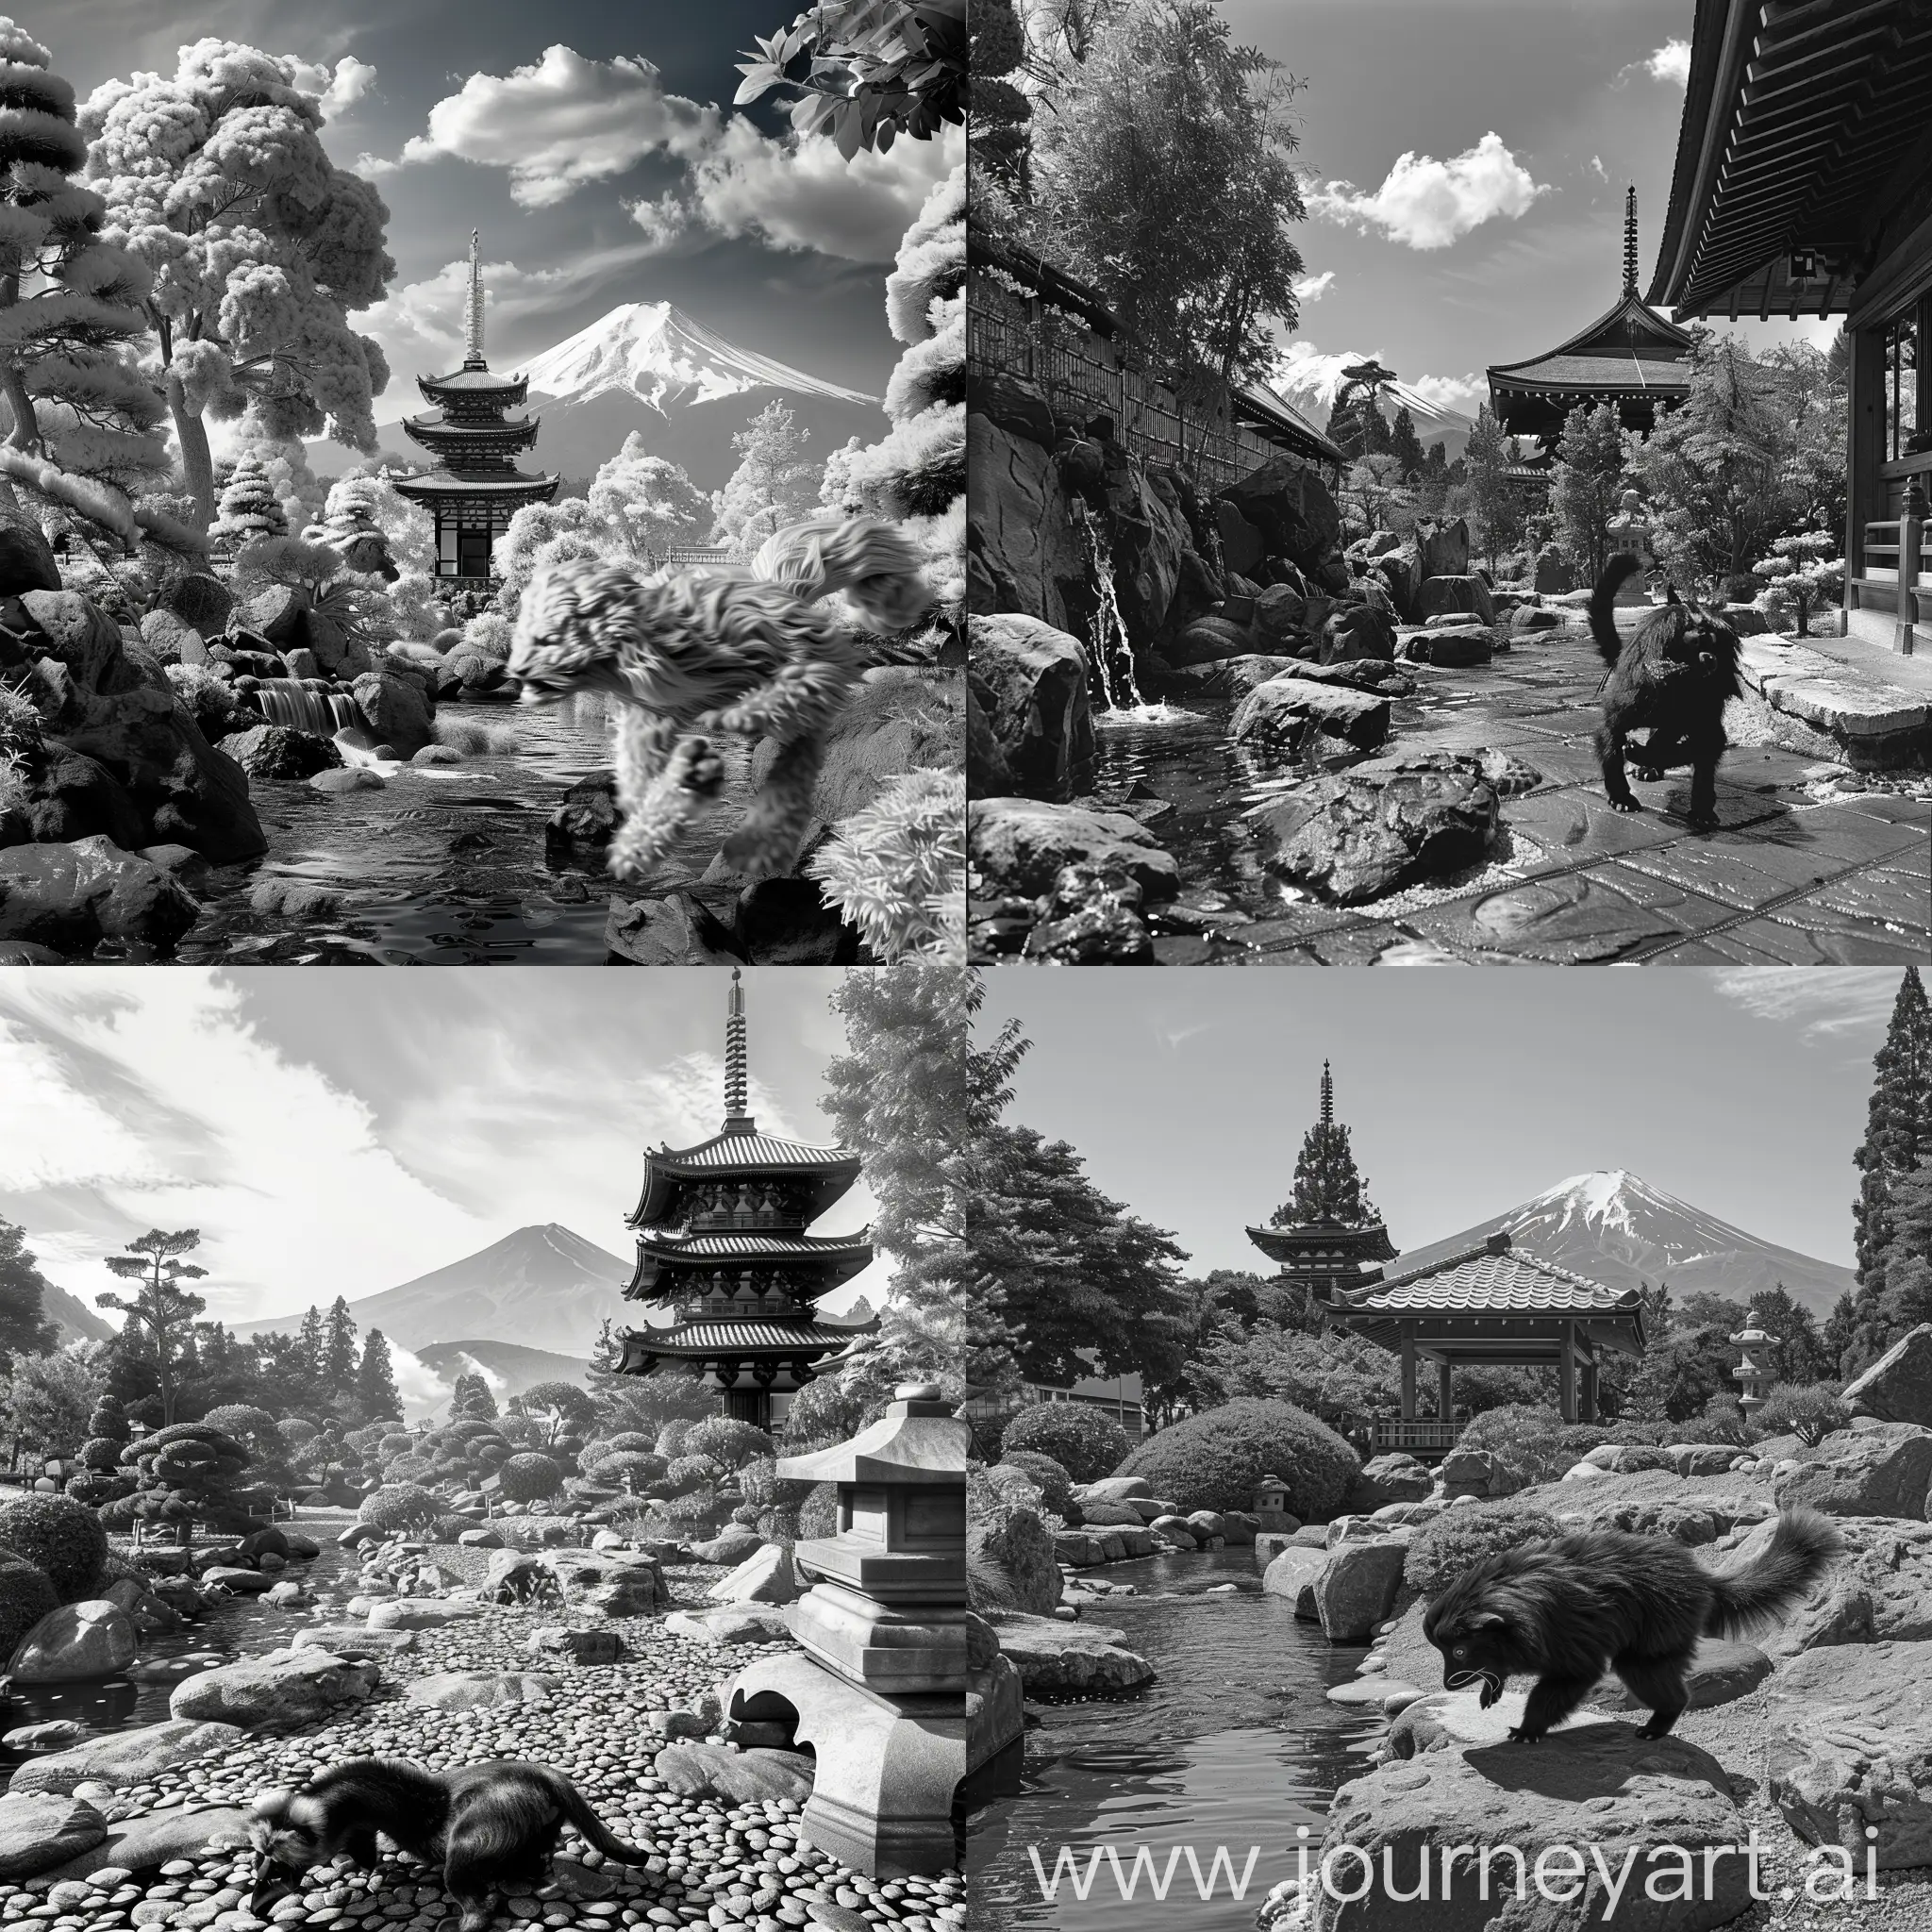  Komainu is preparing to jump the background of a pagoda, in the background of Fujiyama, everything happens in a Japanese rock garden with a stream on the left in the picture japan style 4K monochrome